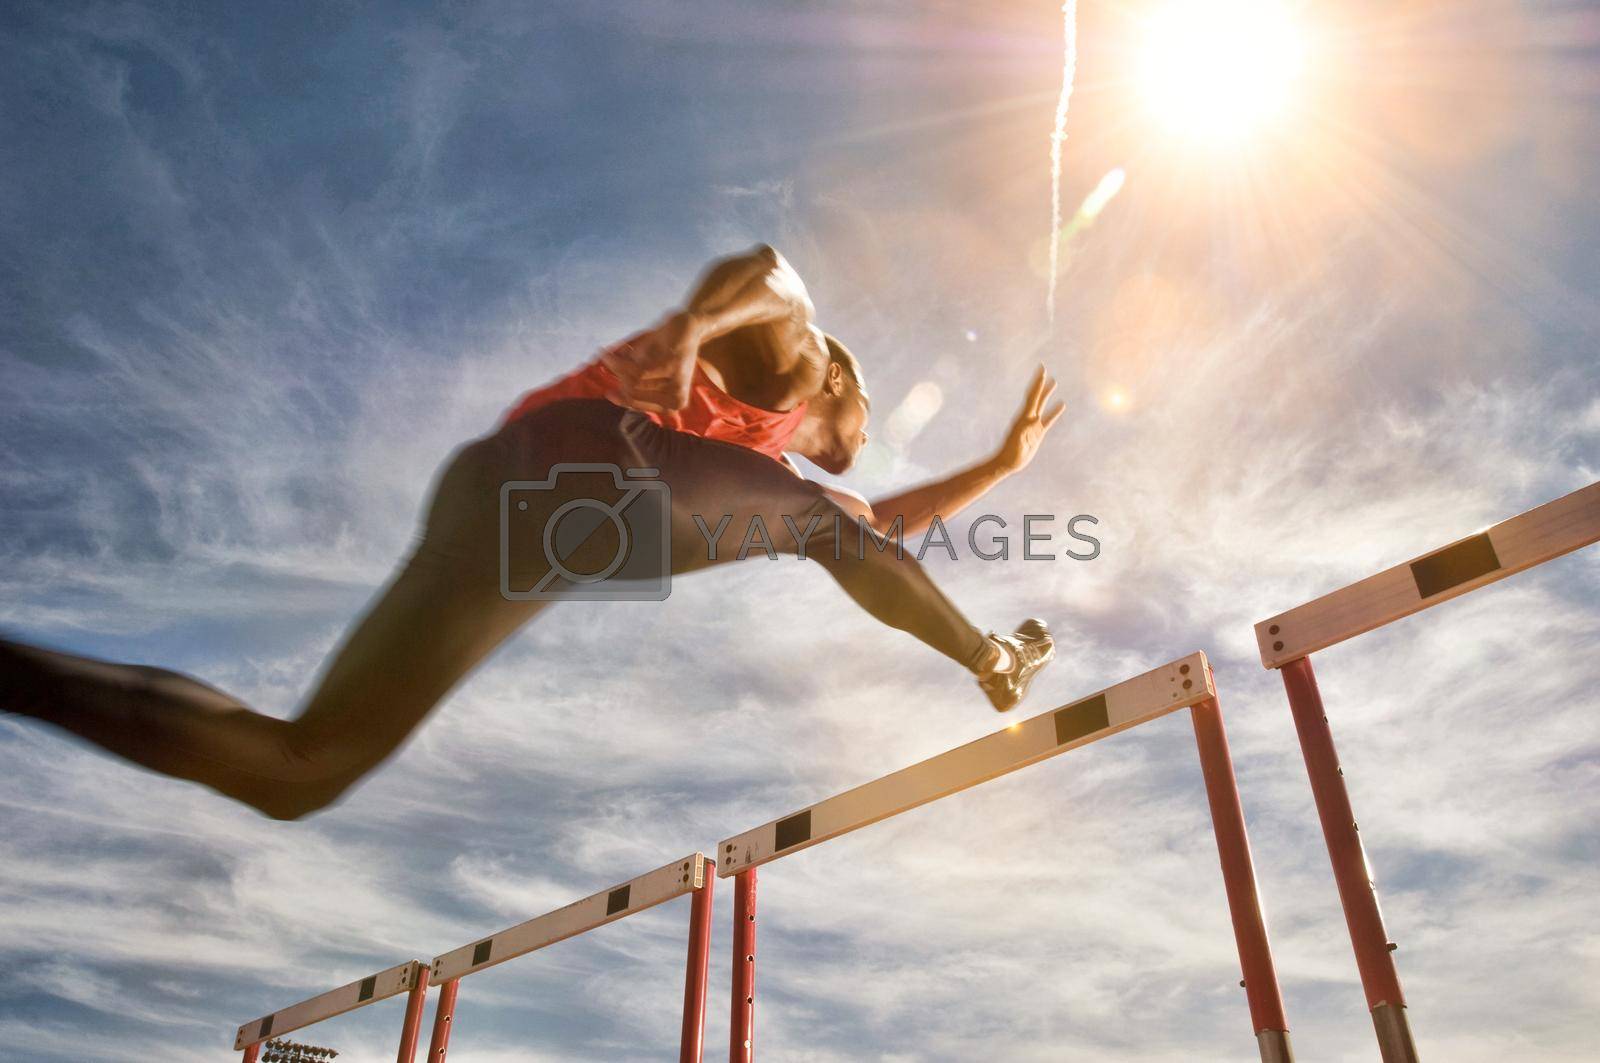 Royalty free image of Runner jumping over running hurdle, low angle view by moodboard